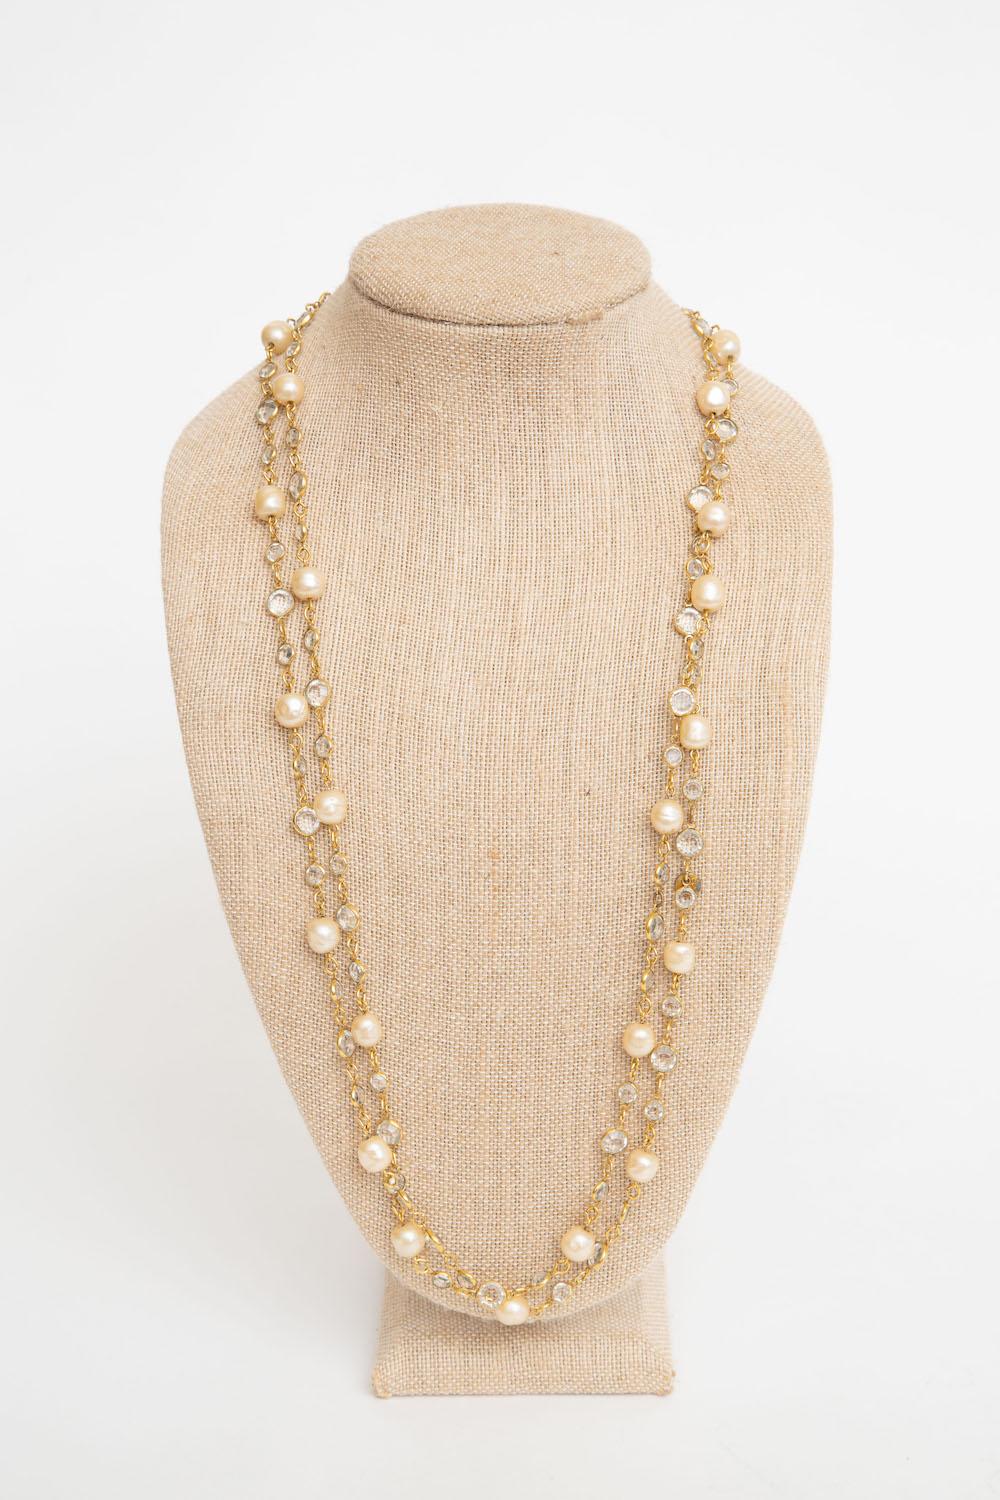 Chanel Vintage Clear Beveled Crystal and Faux Pearl Sautoir Link Necklace  In Good Condition For Sale In North Miami, FL